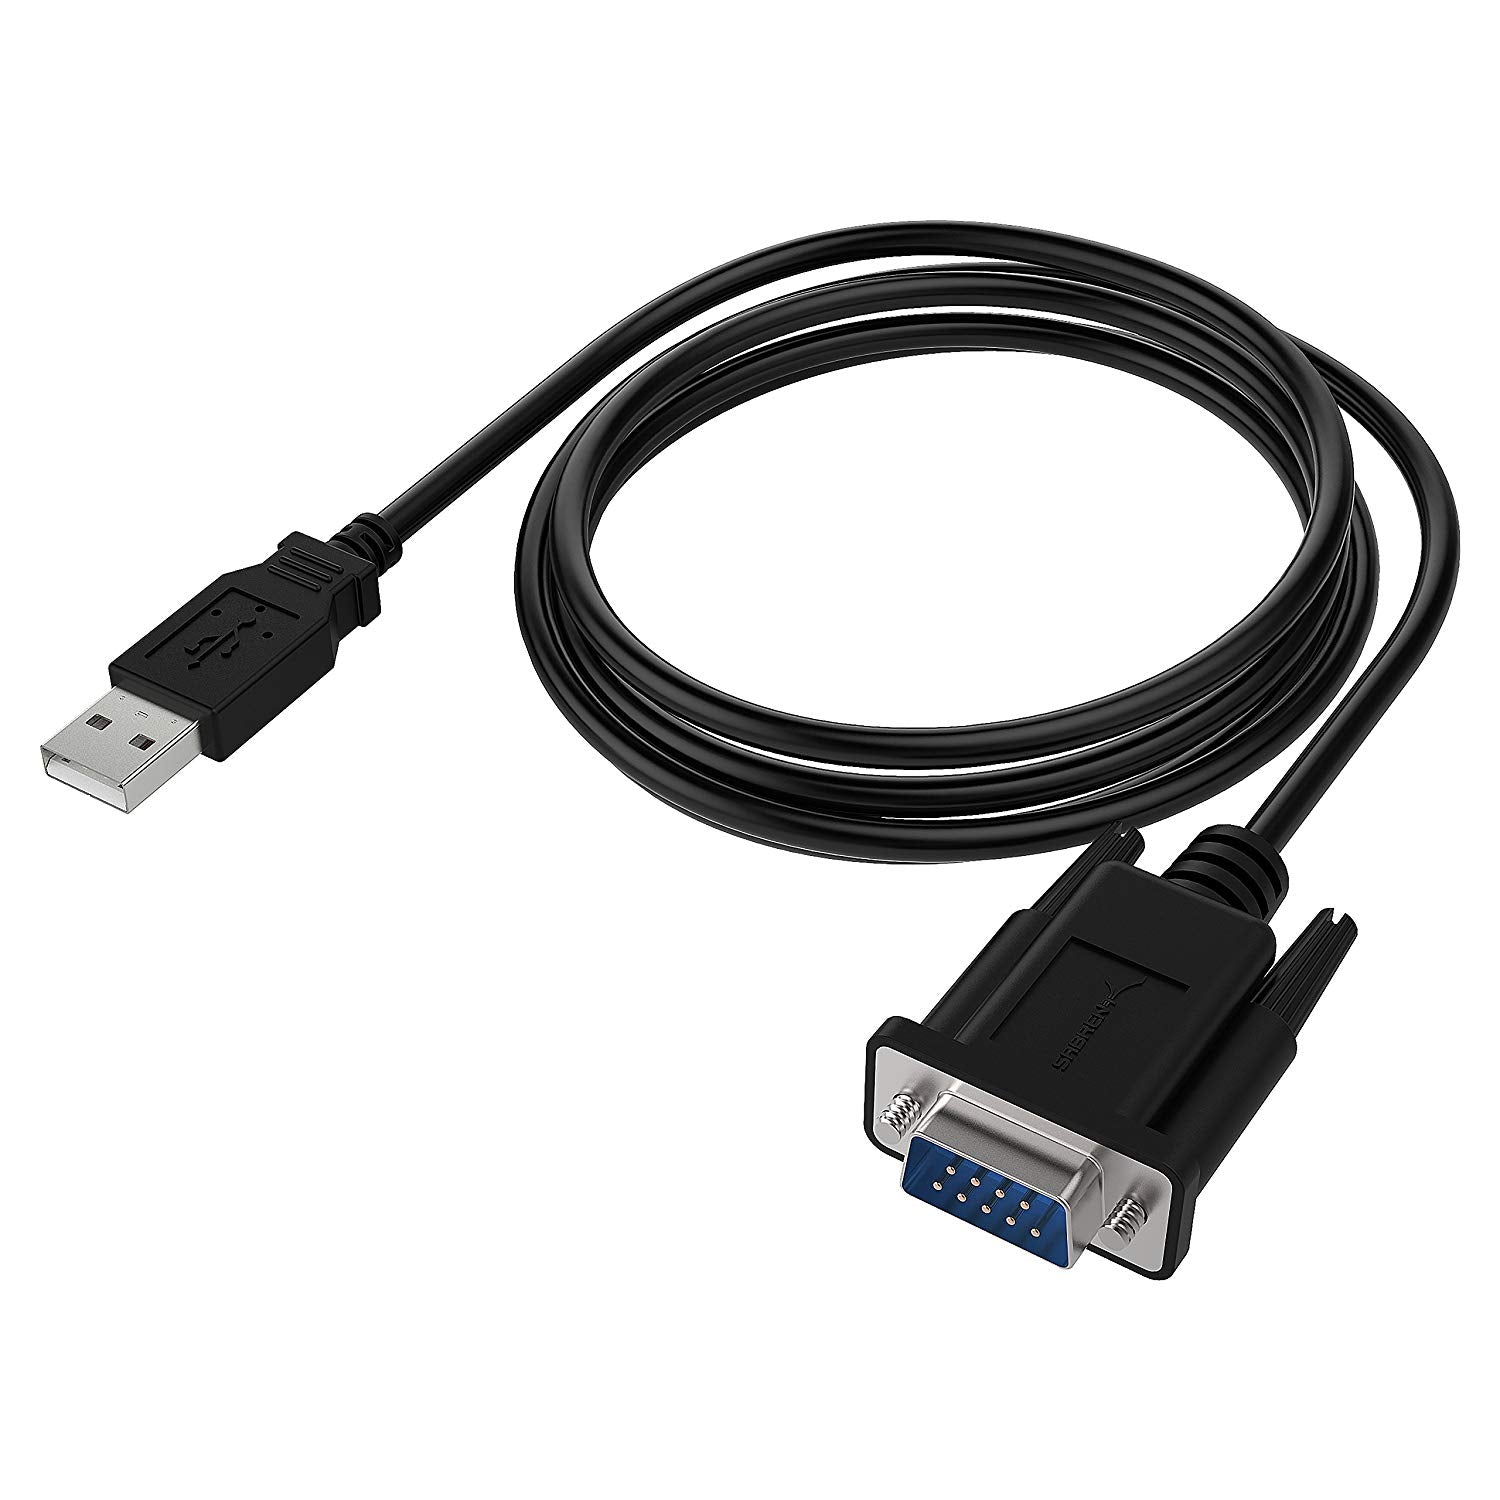 Sabrent CB-FTDI 6Ft USB 2.0 To Serial Db9 9 Pin Rs232 FTDI Chipset Adapter Cable